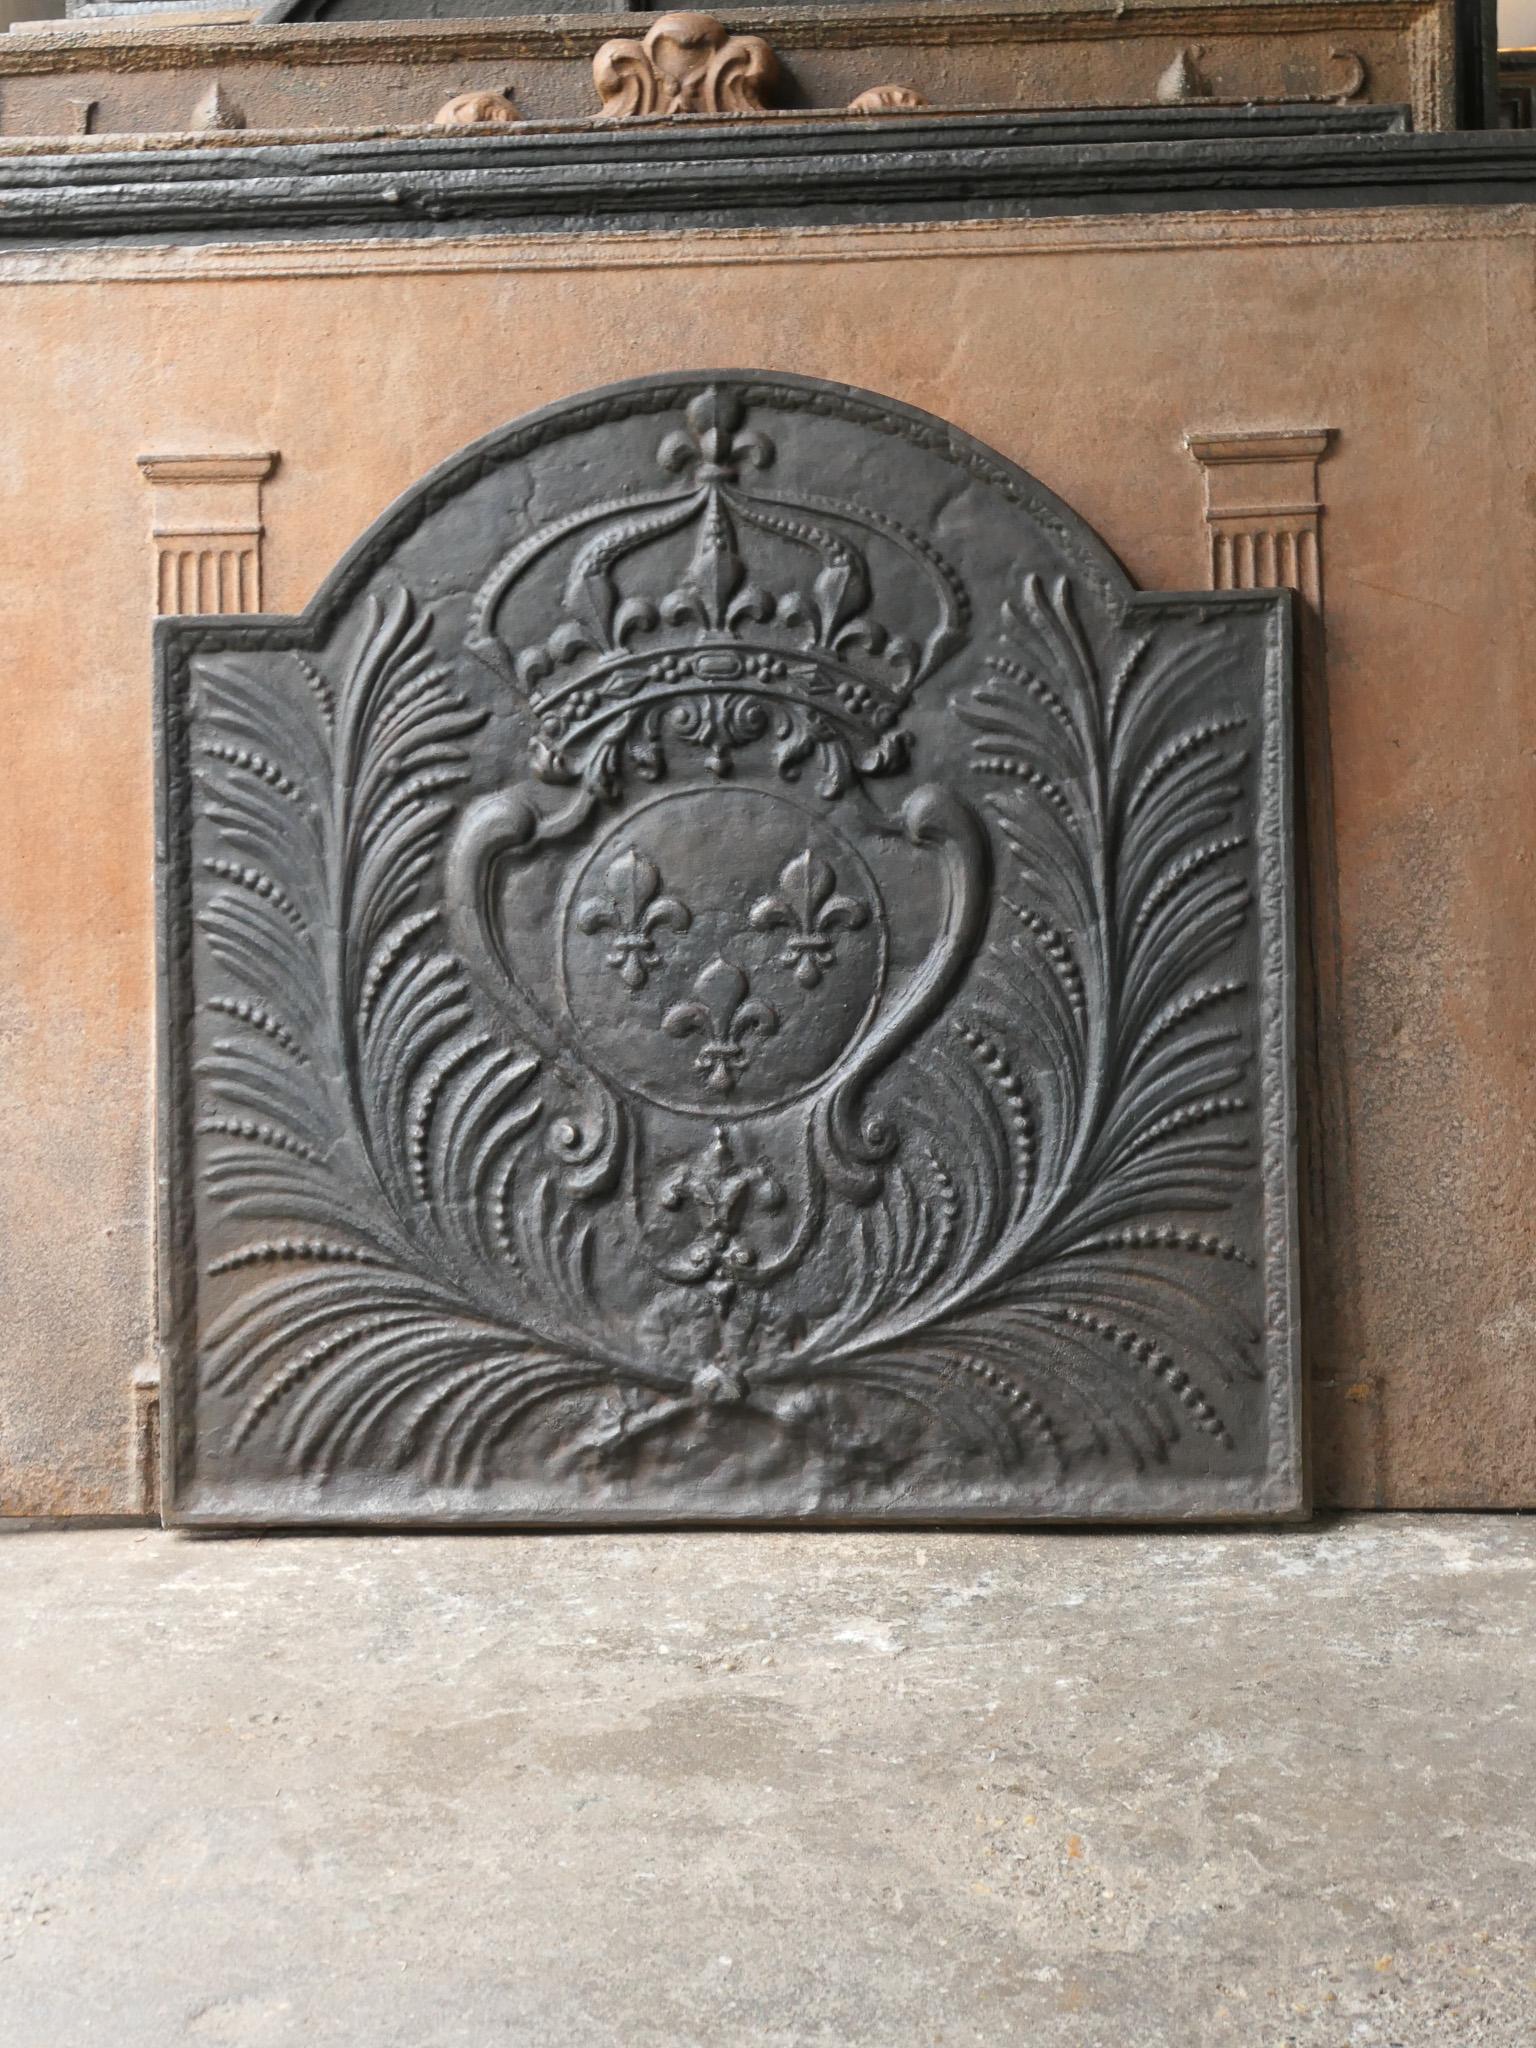 French Louis XIV style fireback with the Arms of France. A coat of arms of the House of Bourbon, an originally French royal house that became a major dynasty in Europe. The house delivered kings for Spain (Navarra), France, both Sicilies and Parma.